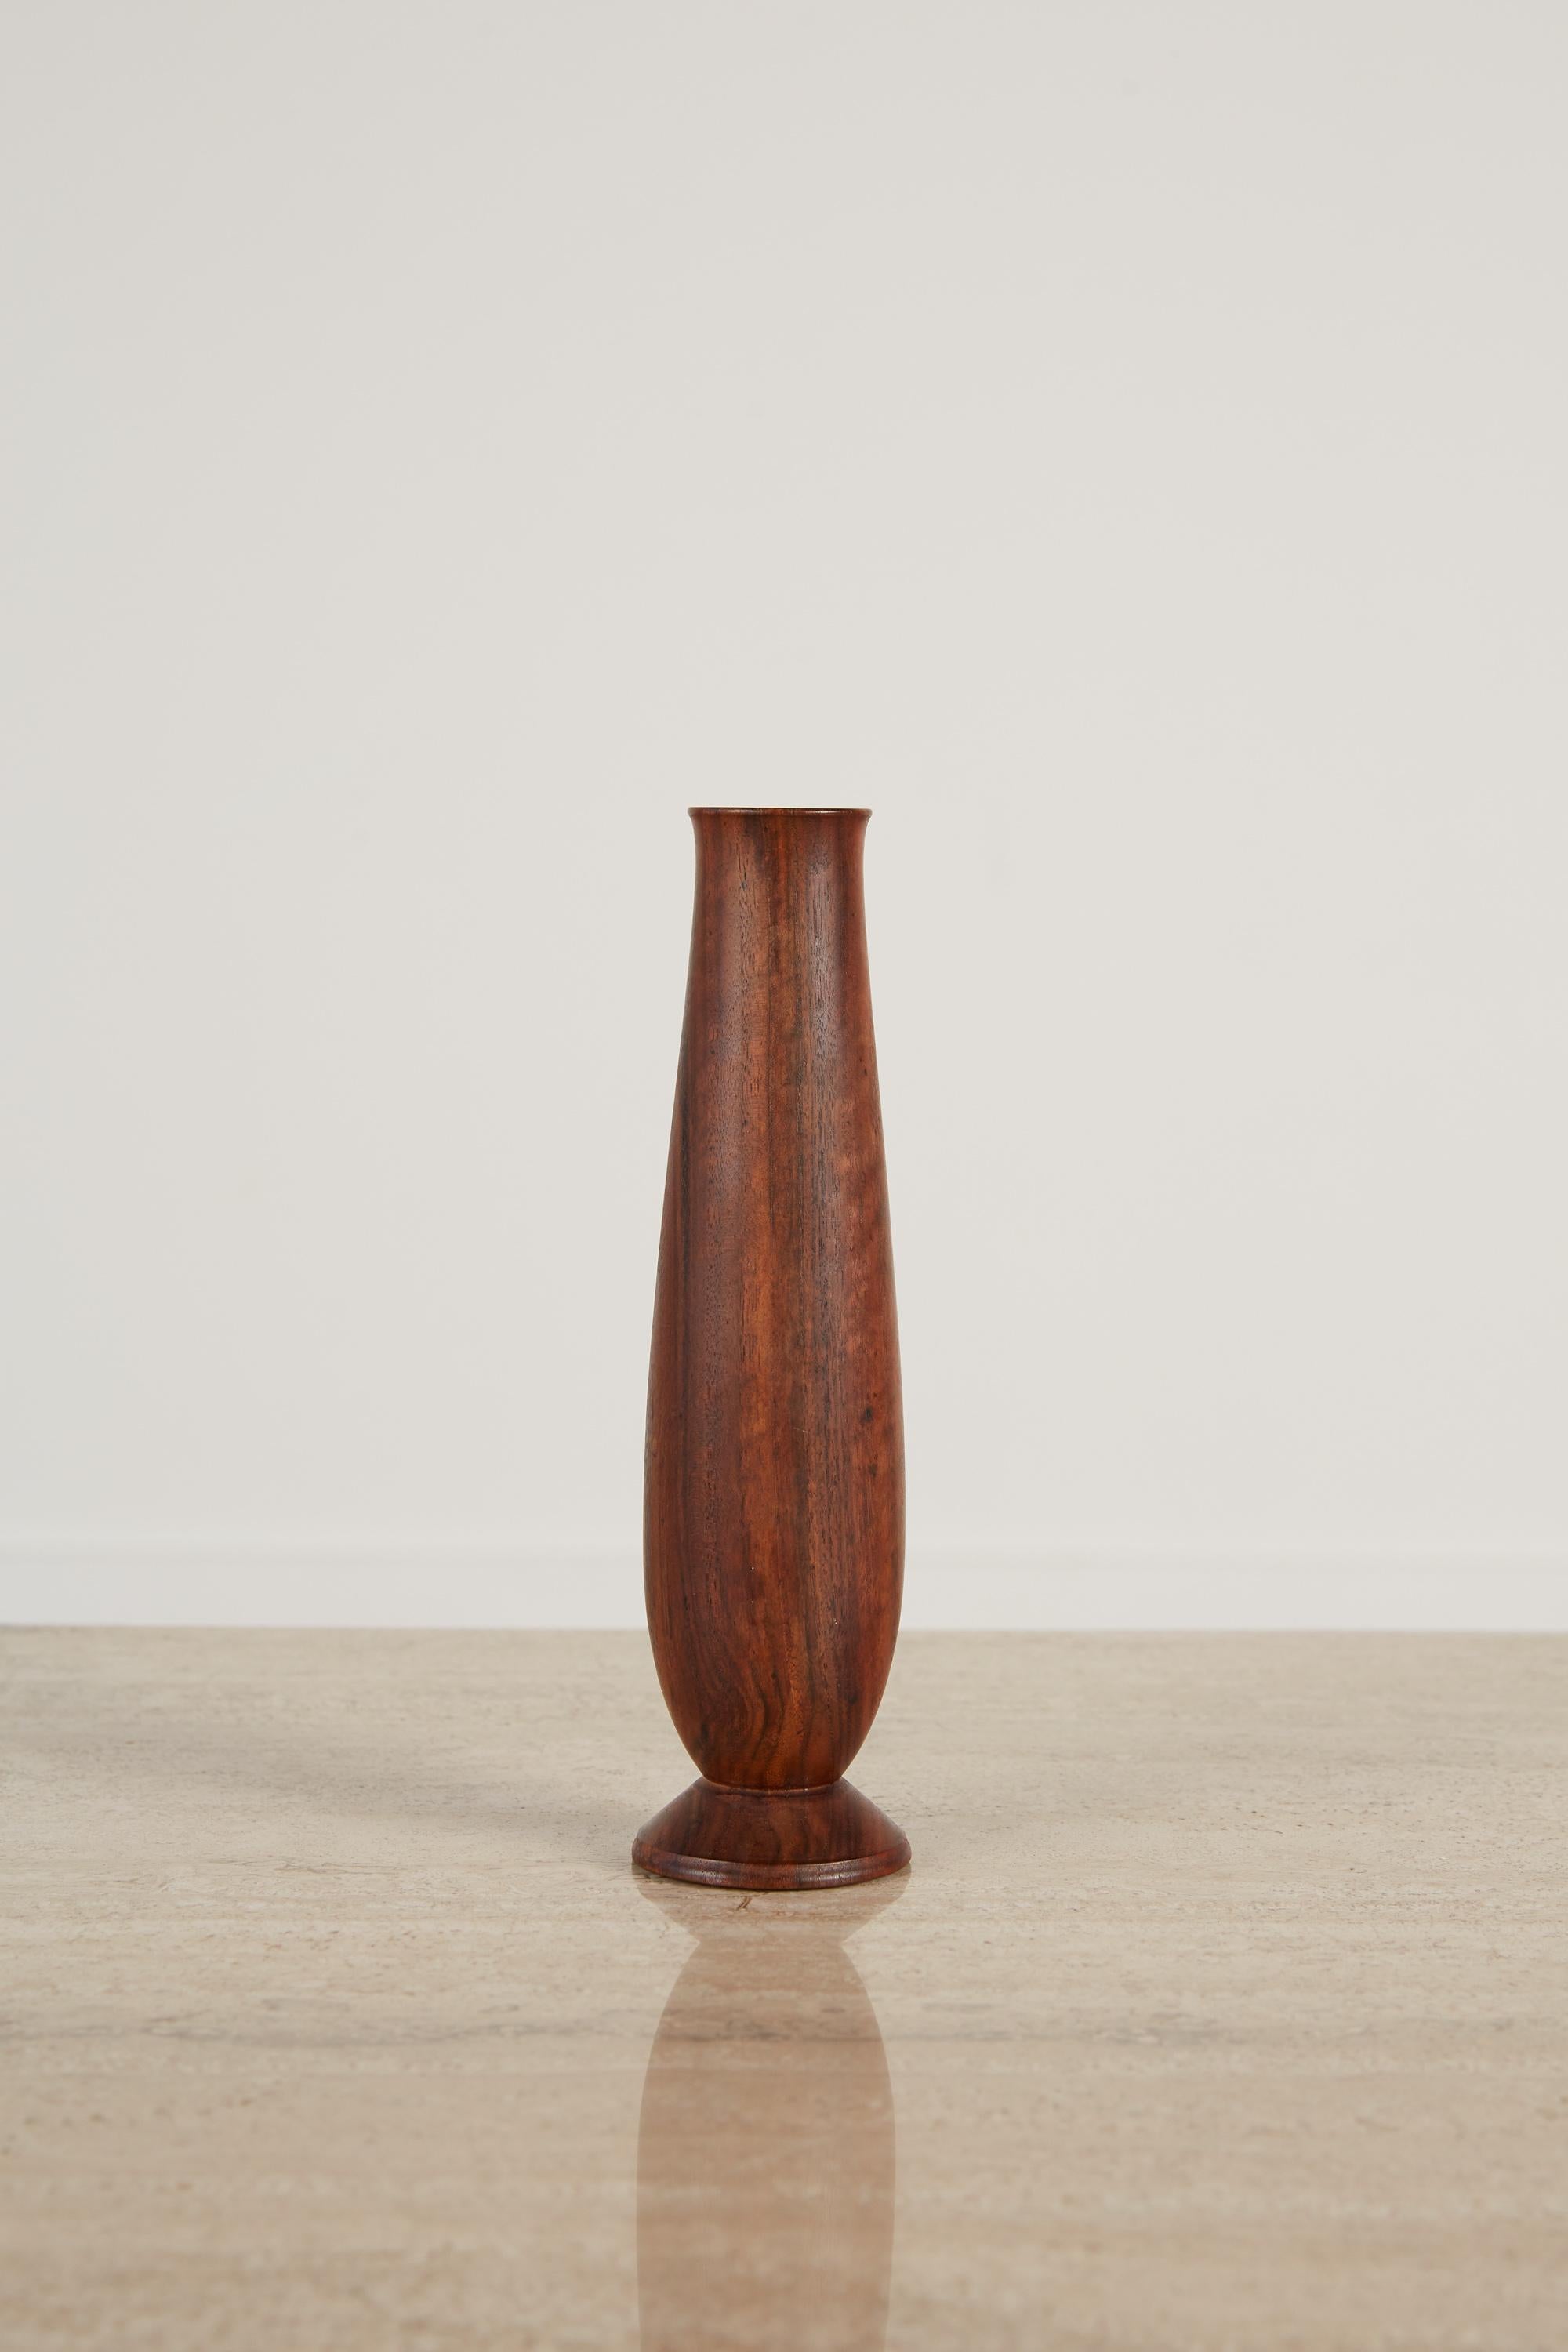 With a similar turned bud vase in the Smithsonian American Art Museum, Del Stubbs and his craftsmanship is evident and well regarded by woodworkers and art collectors alike. His work exhibits a level of appreciation and understanding of how delicate